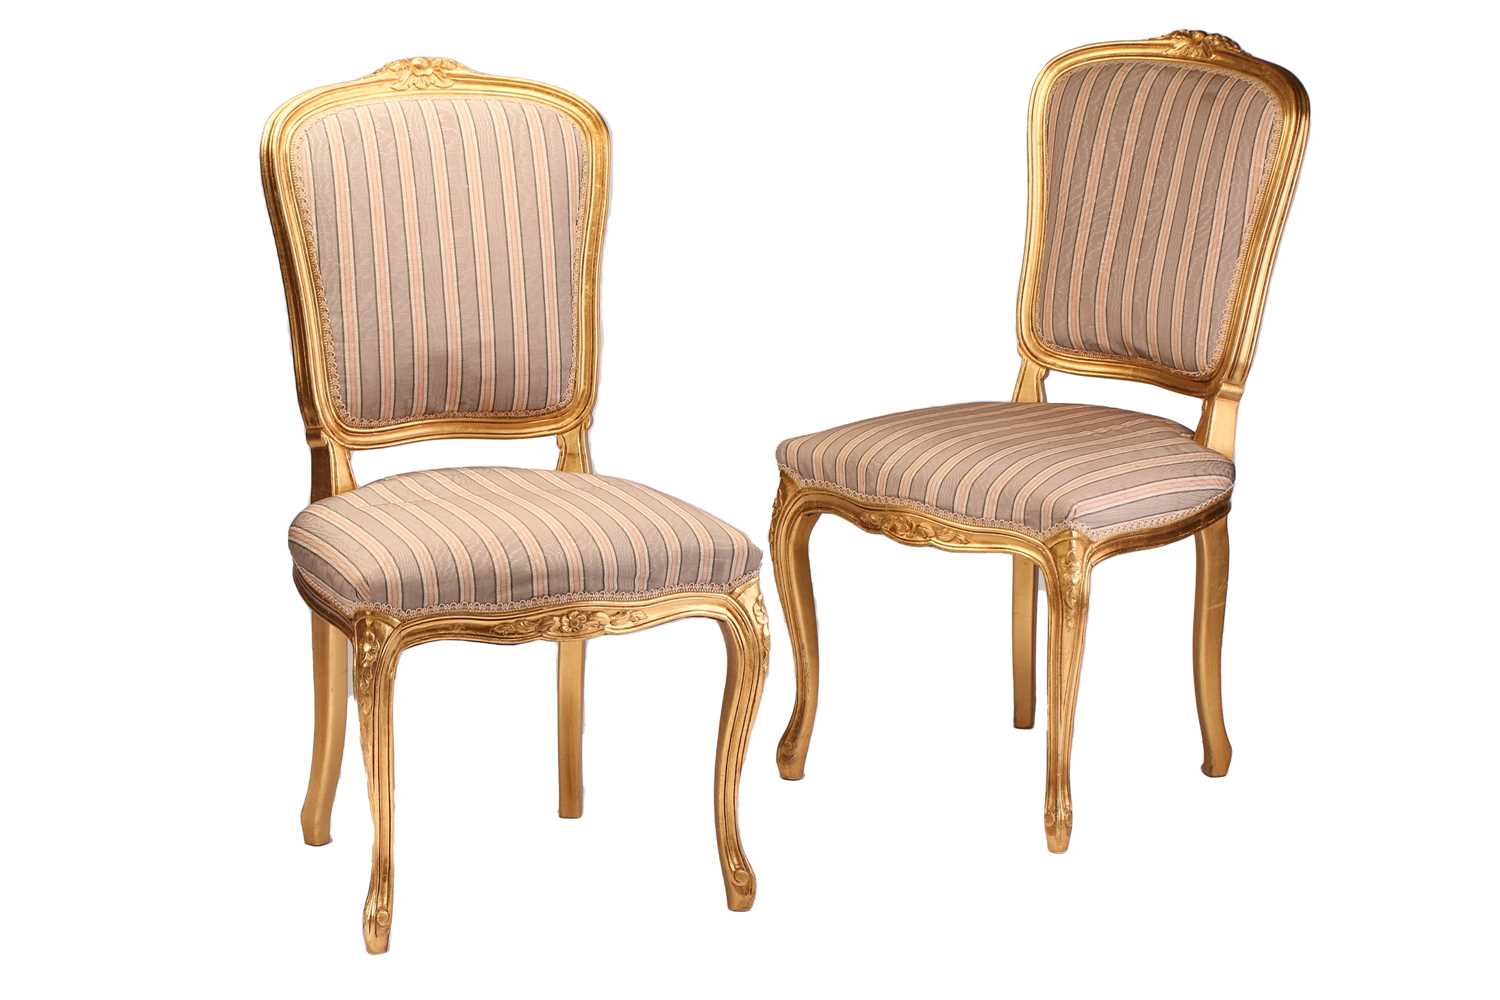 Set of Four Louis XV Style Carved Gilt Salon Chairs - Image 2 of 3